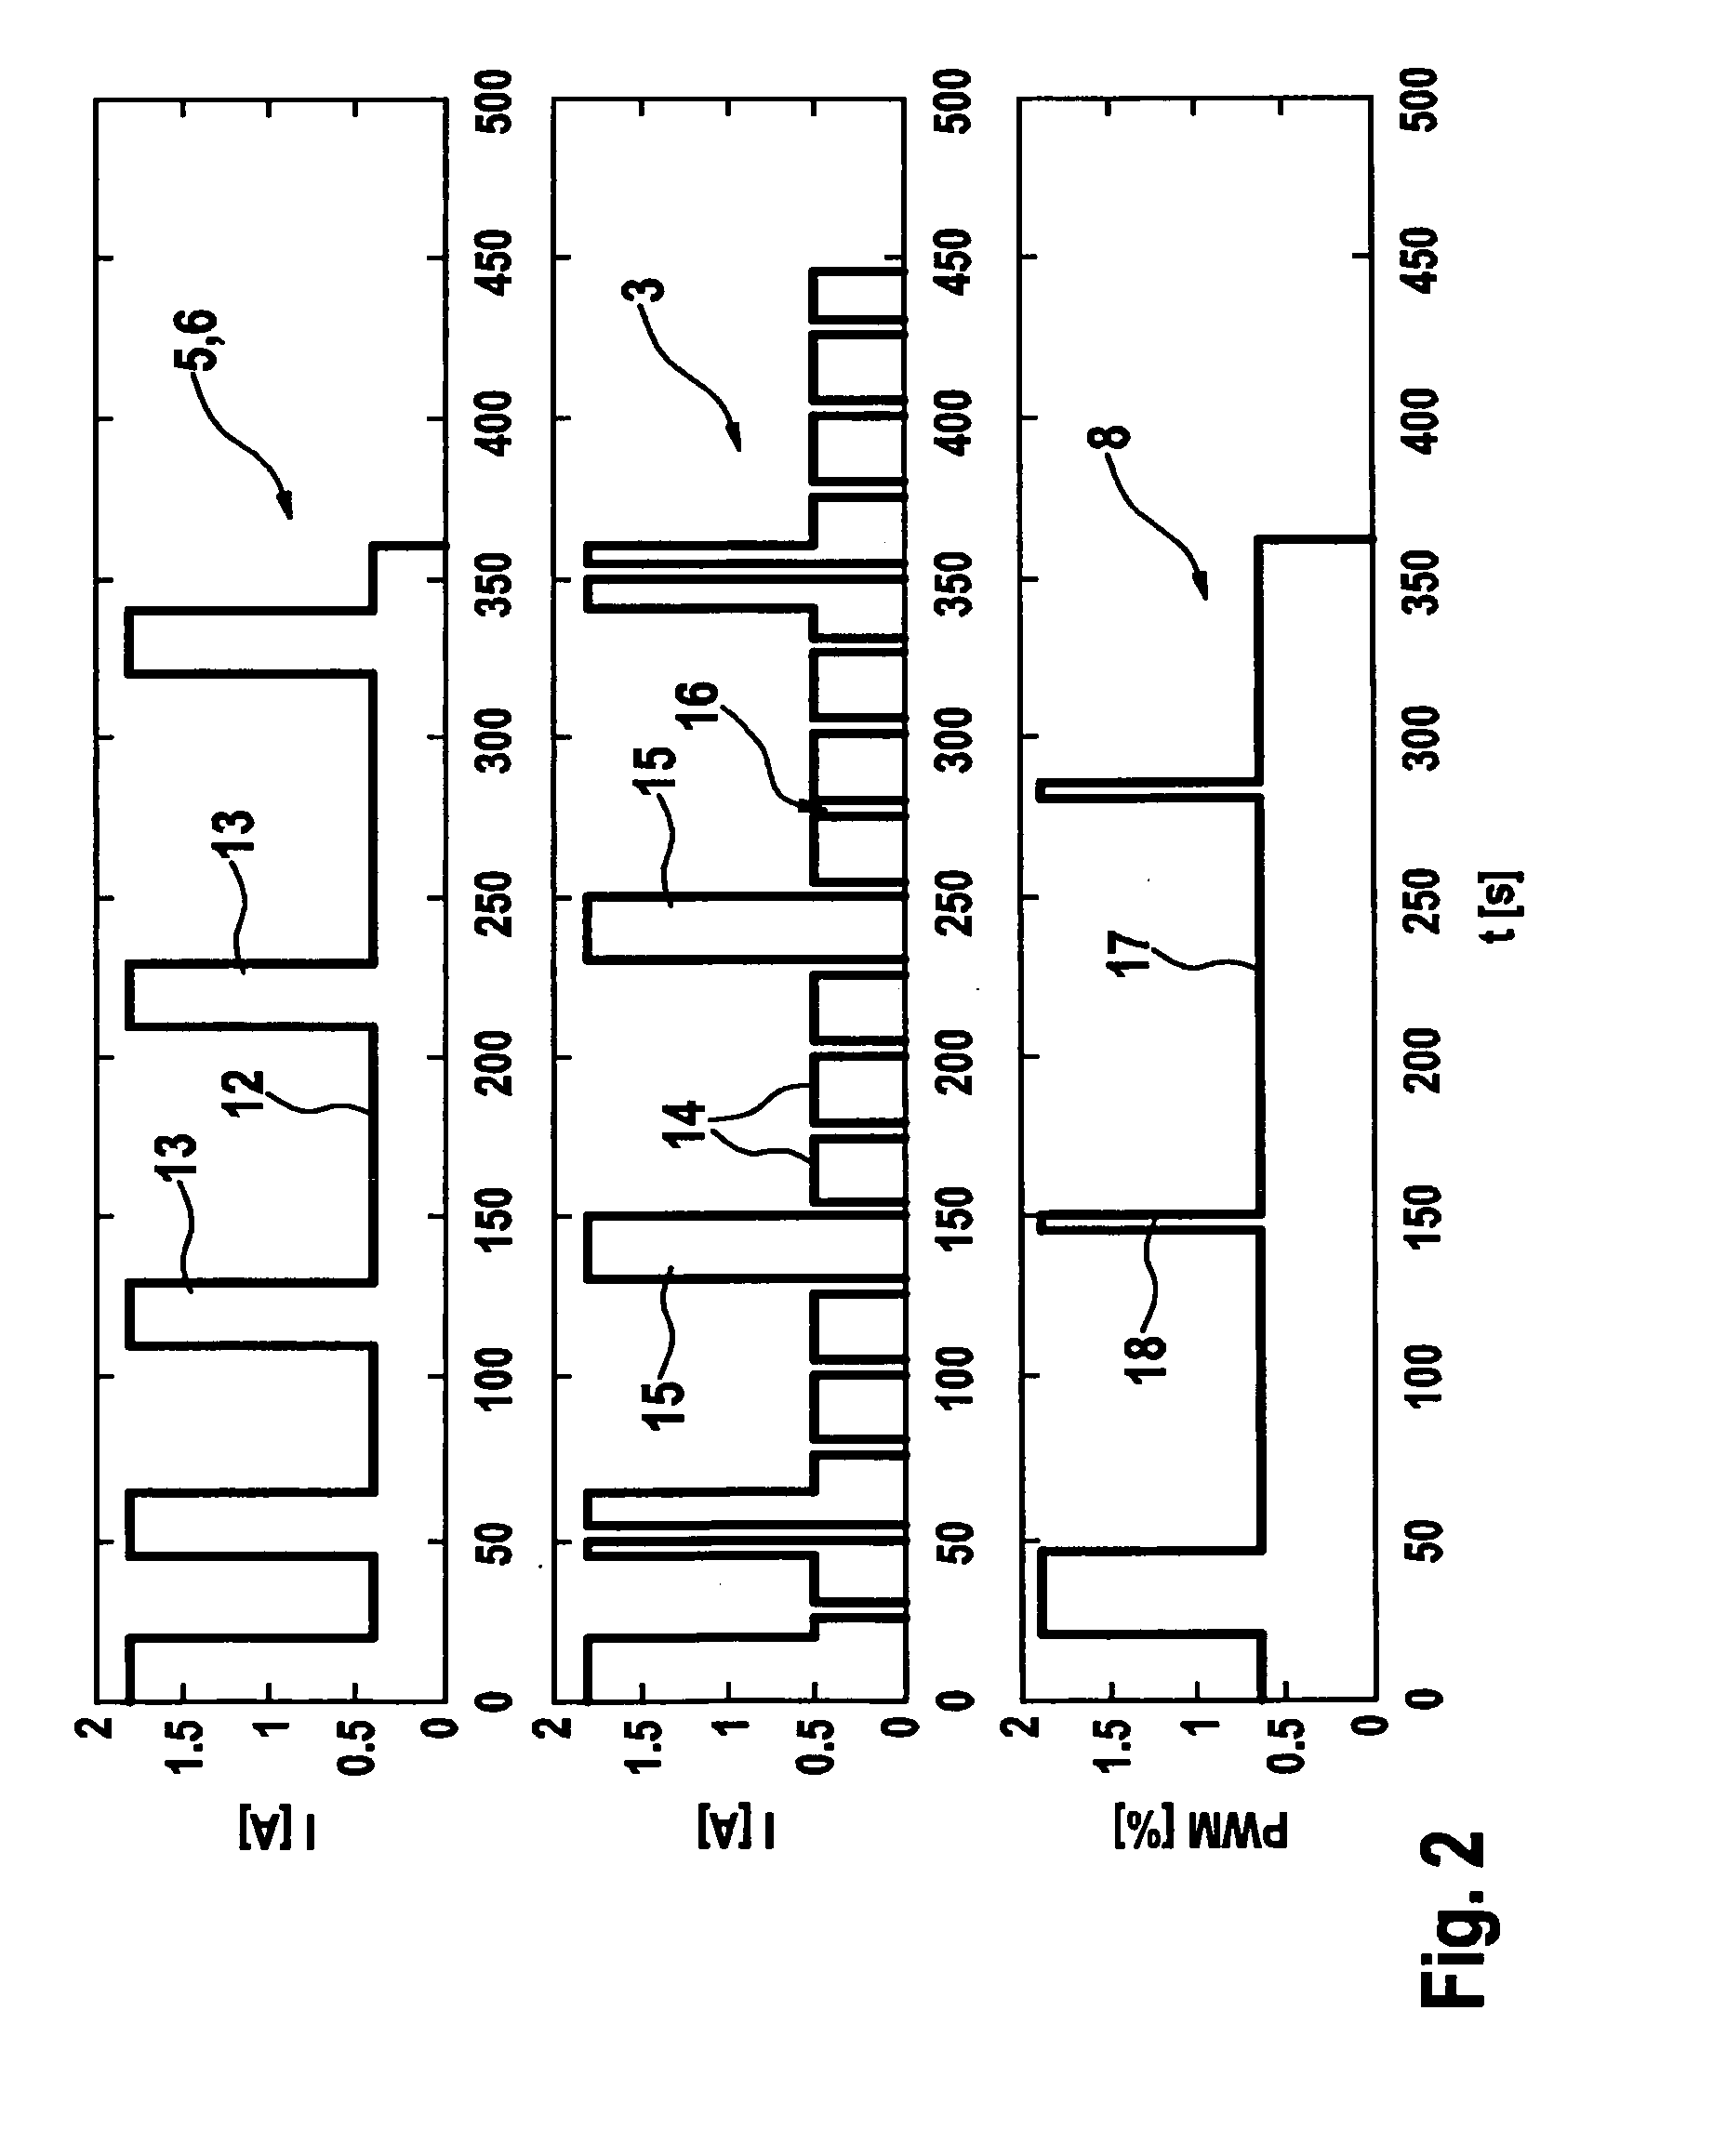 Method for operating an hydraulic brake system in a motovehicle